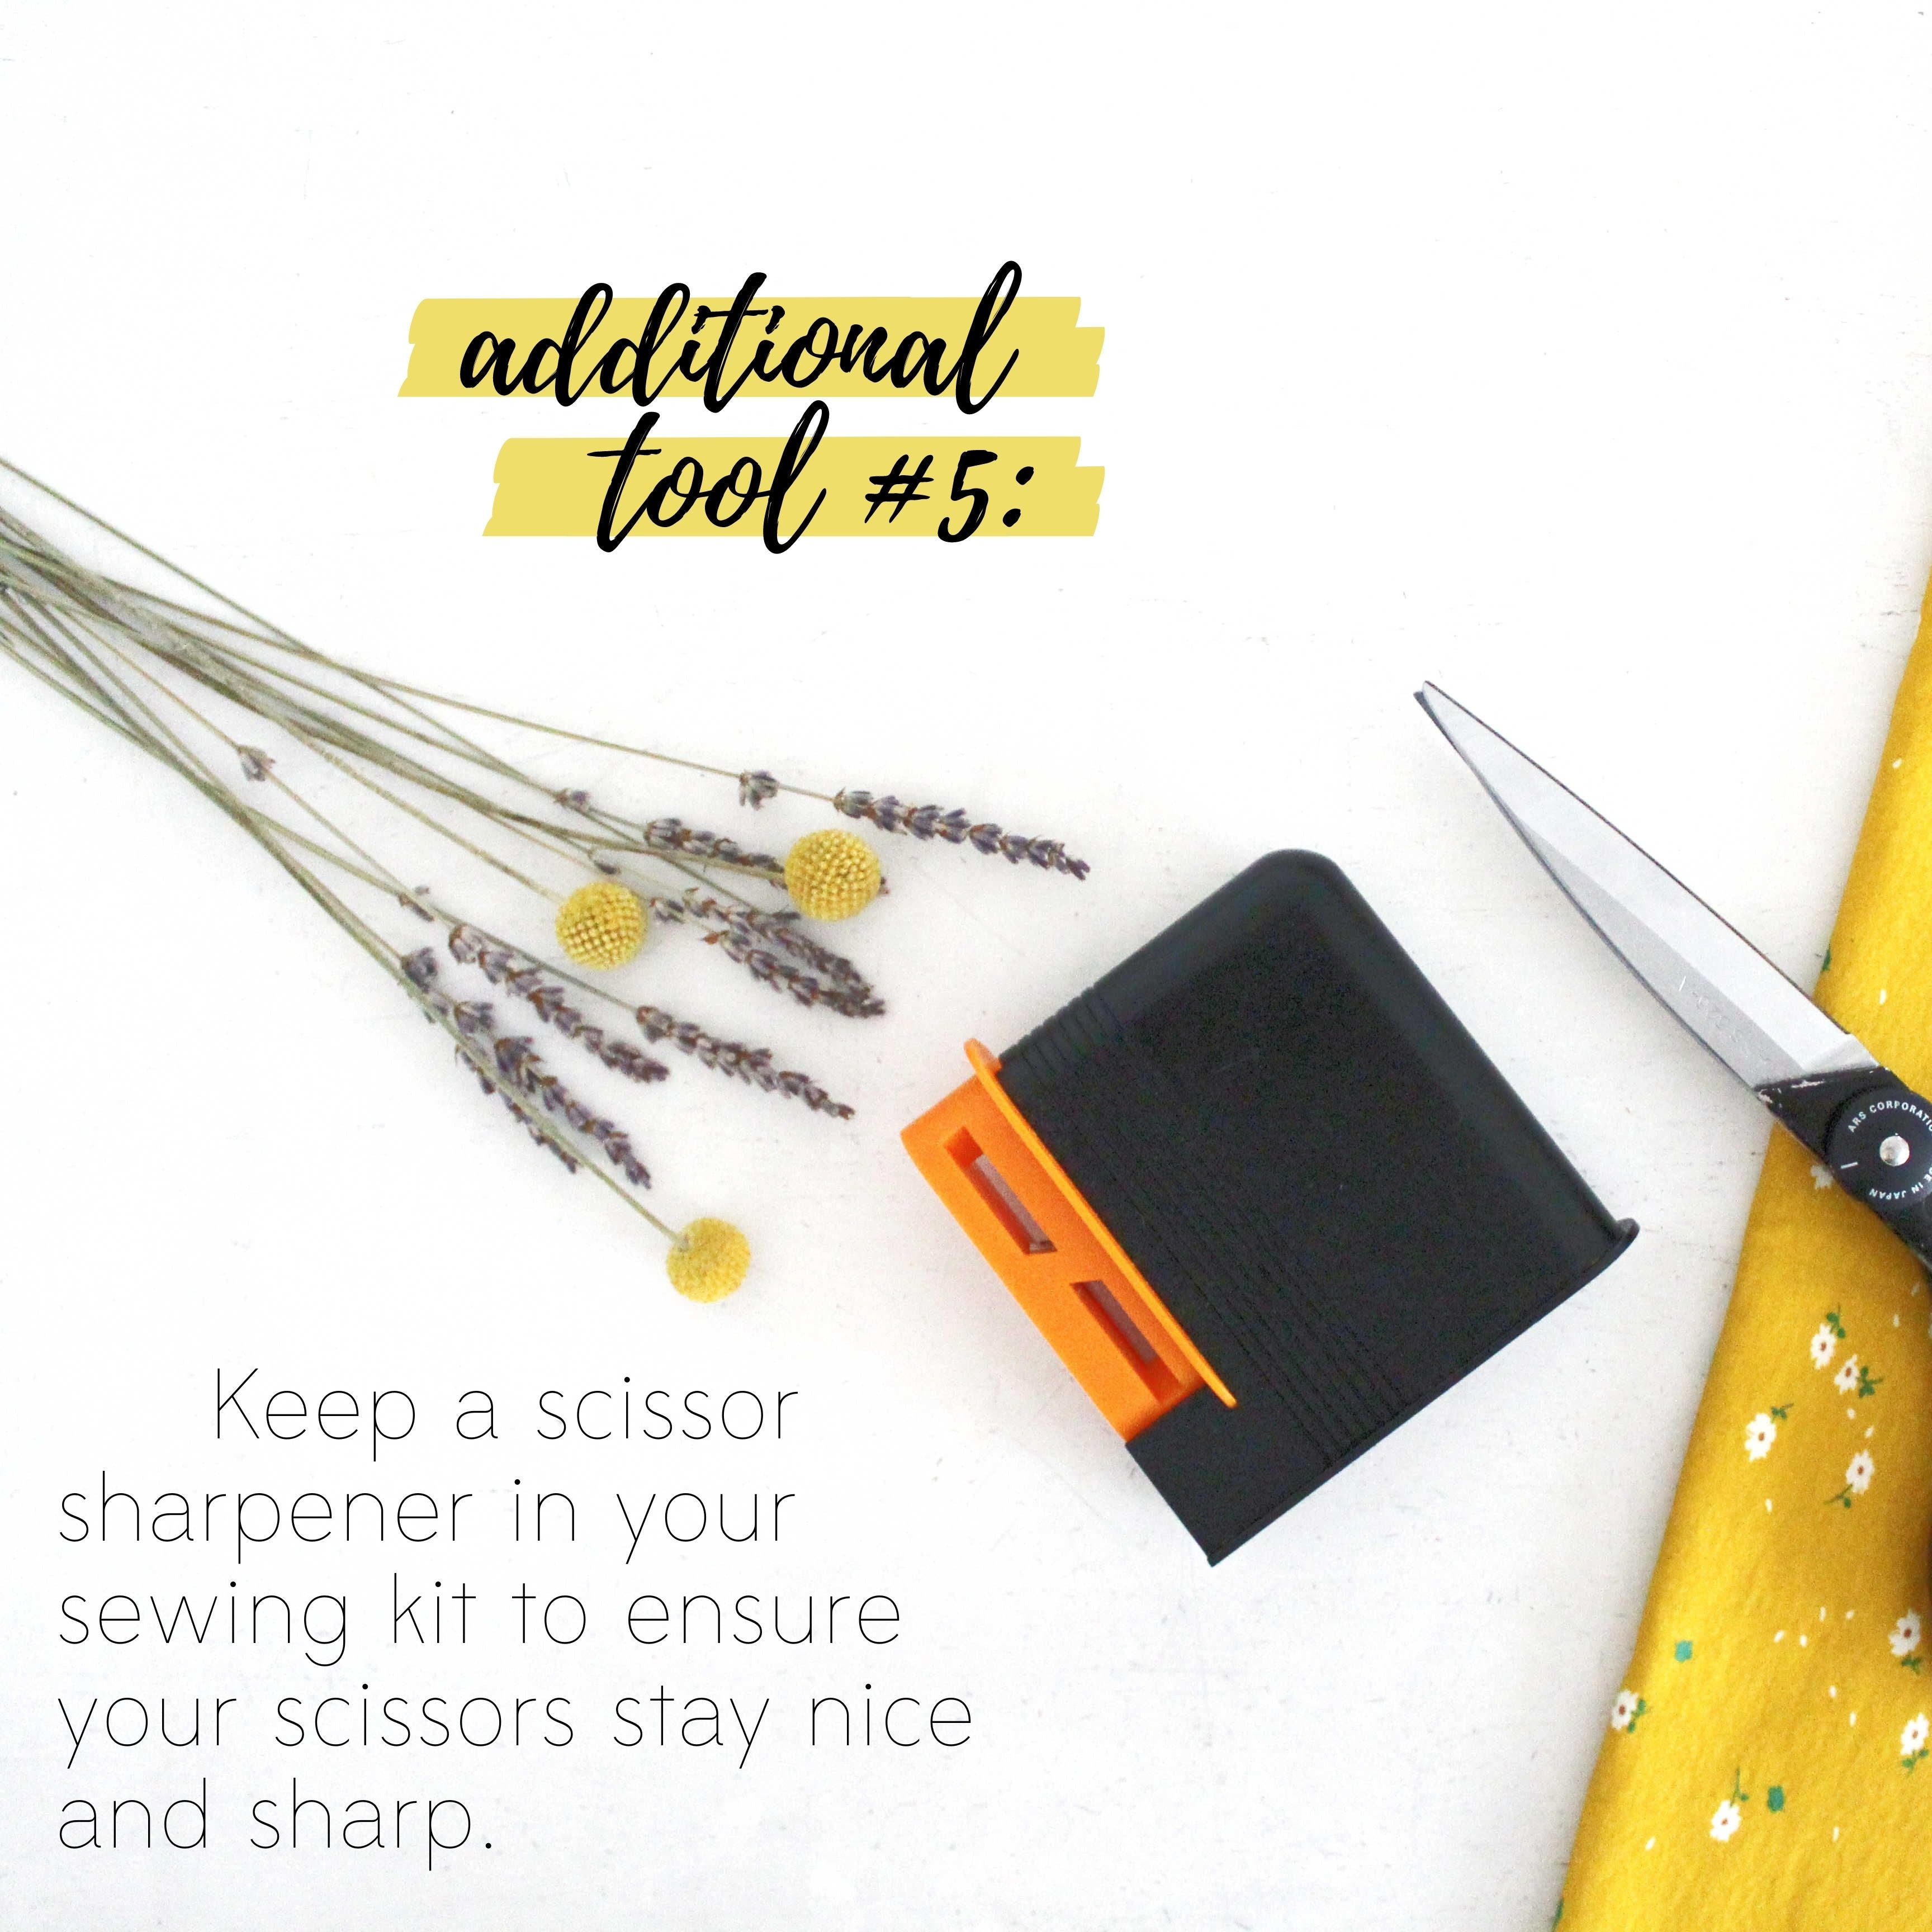 How To Build A Sewing Kit: Additional Tool #5, Scissor Sharpener